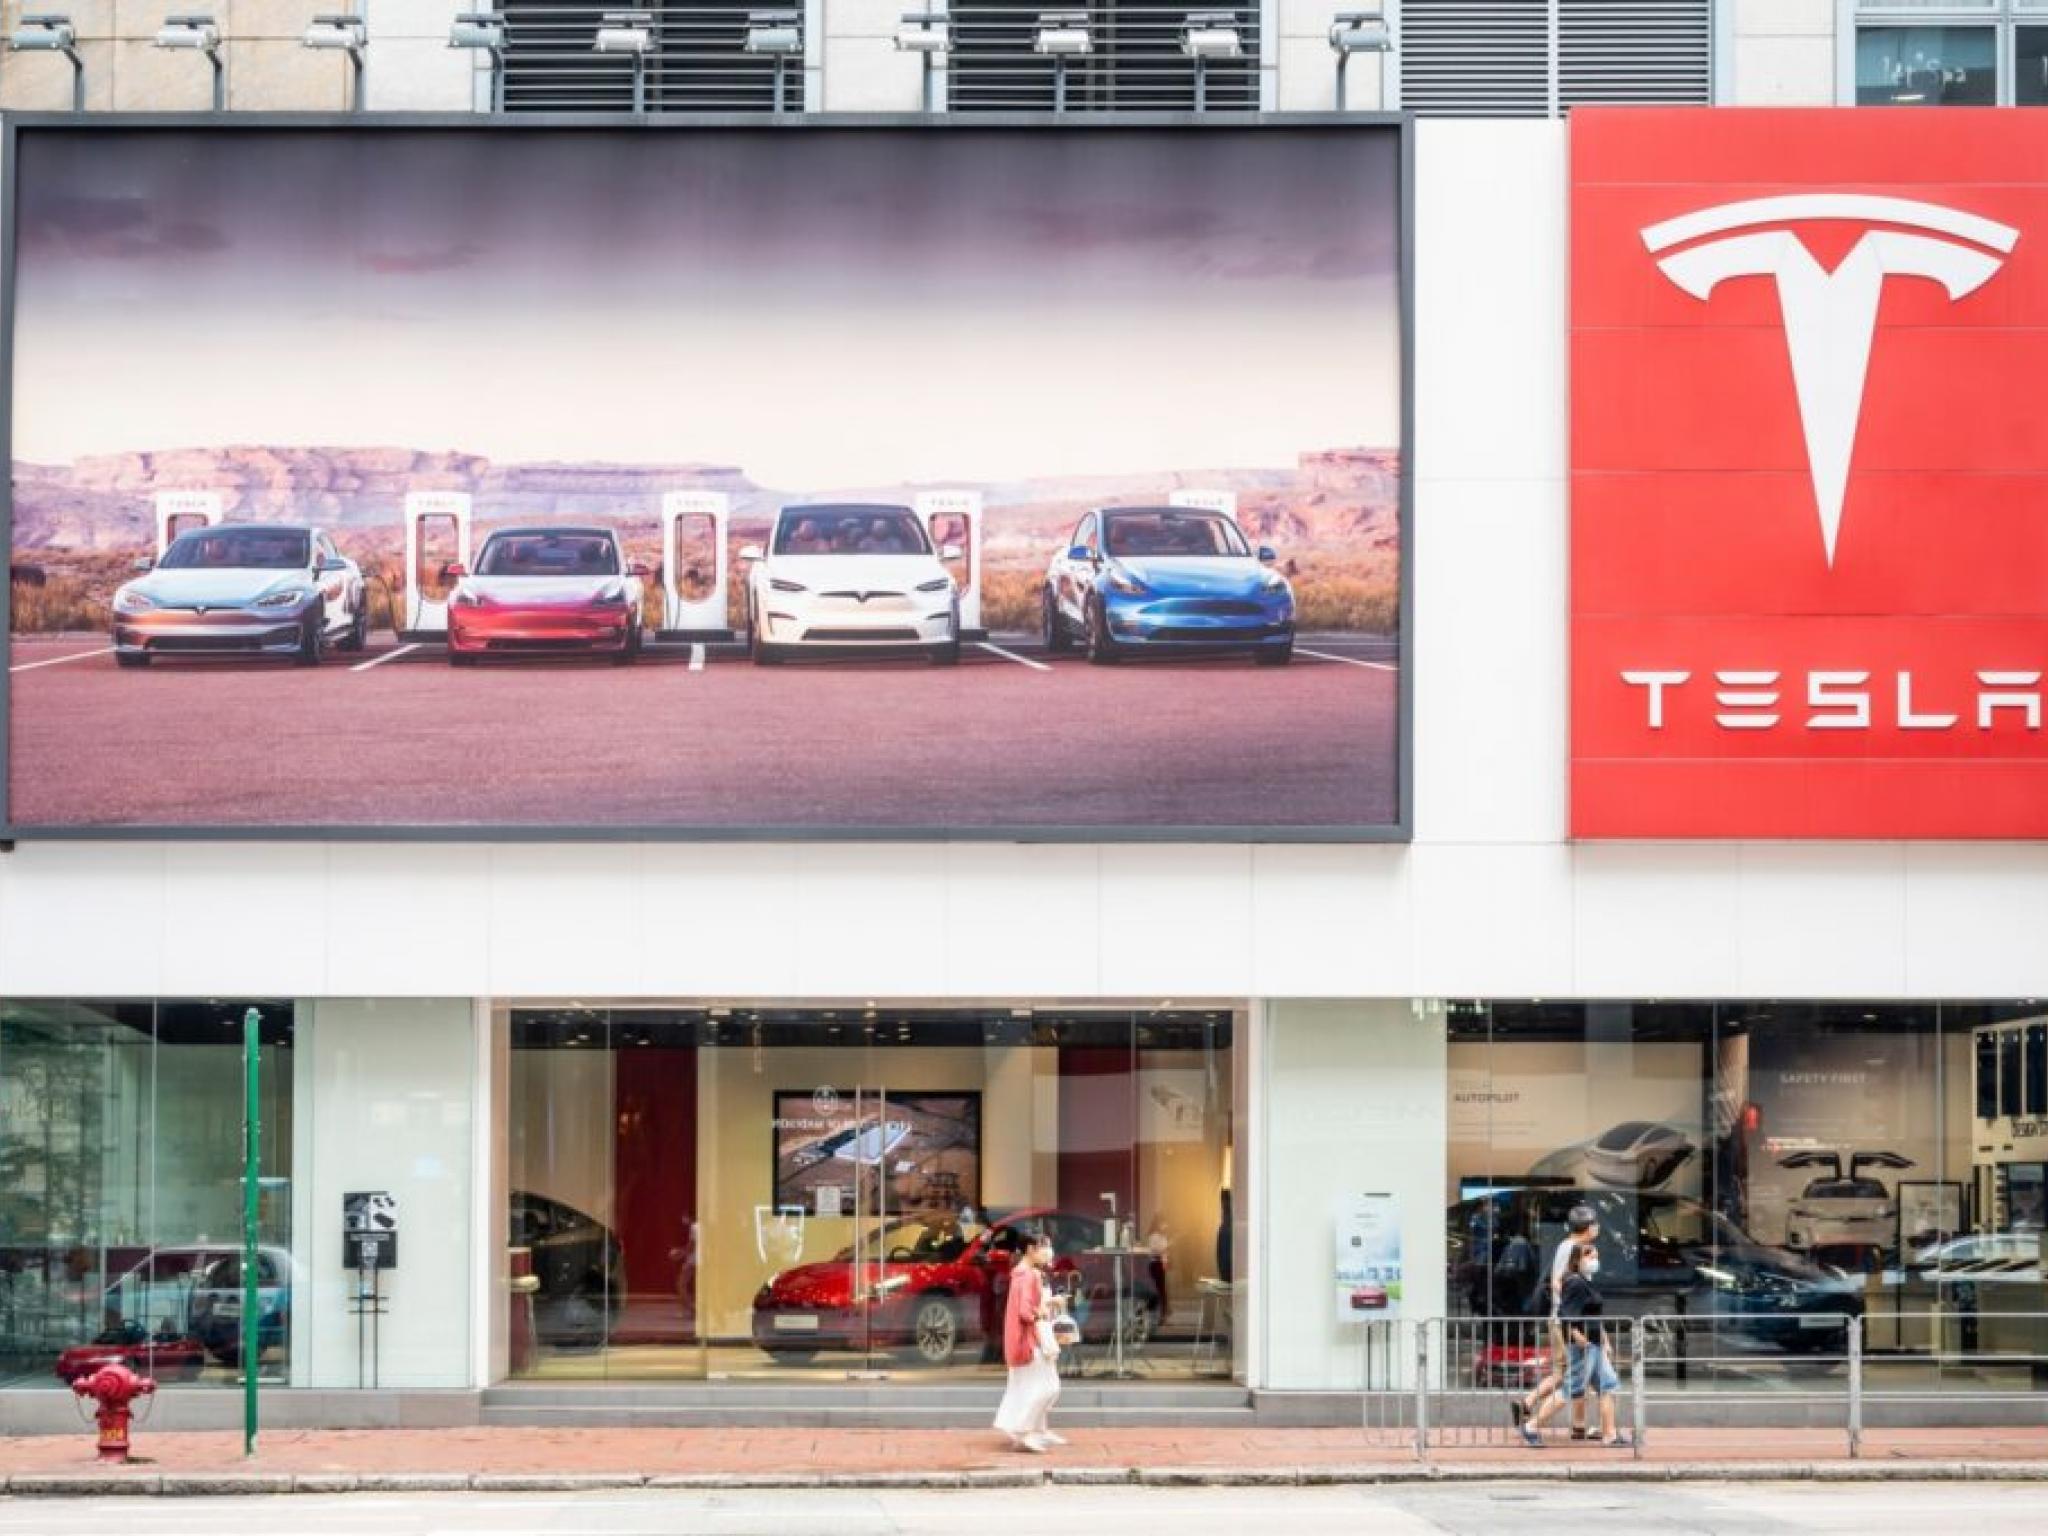  is-teslas-delivery-drought-over-beijing-center-rumored-to-have-hit-record-day 